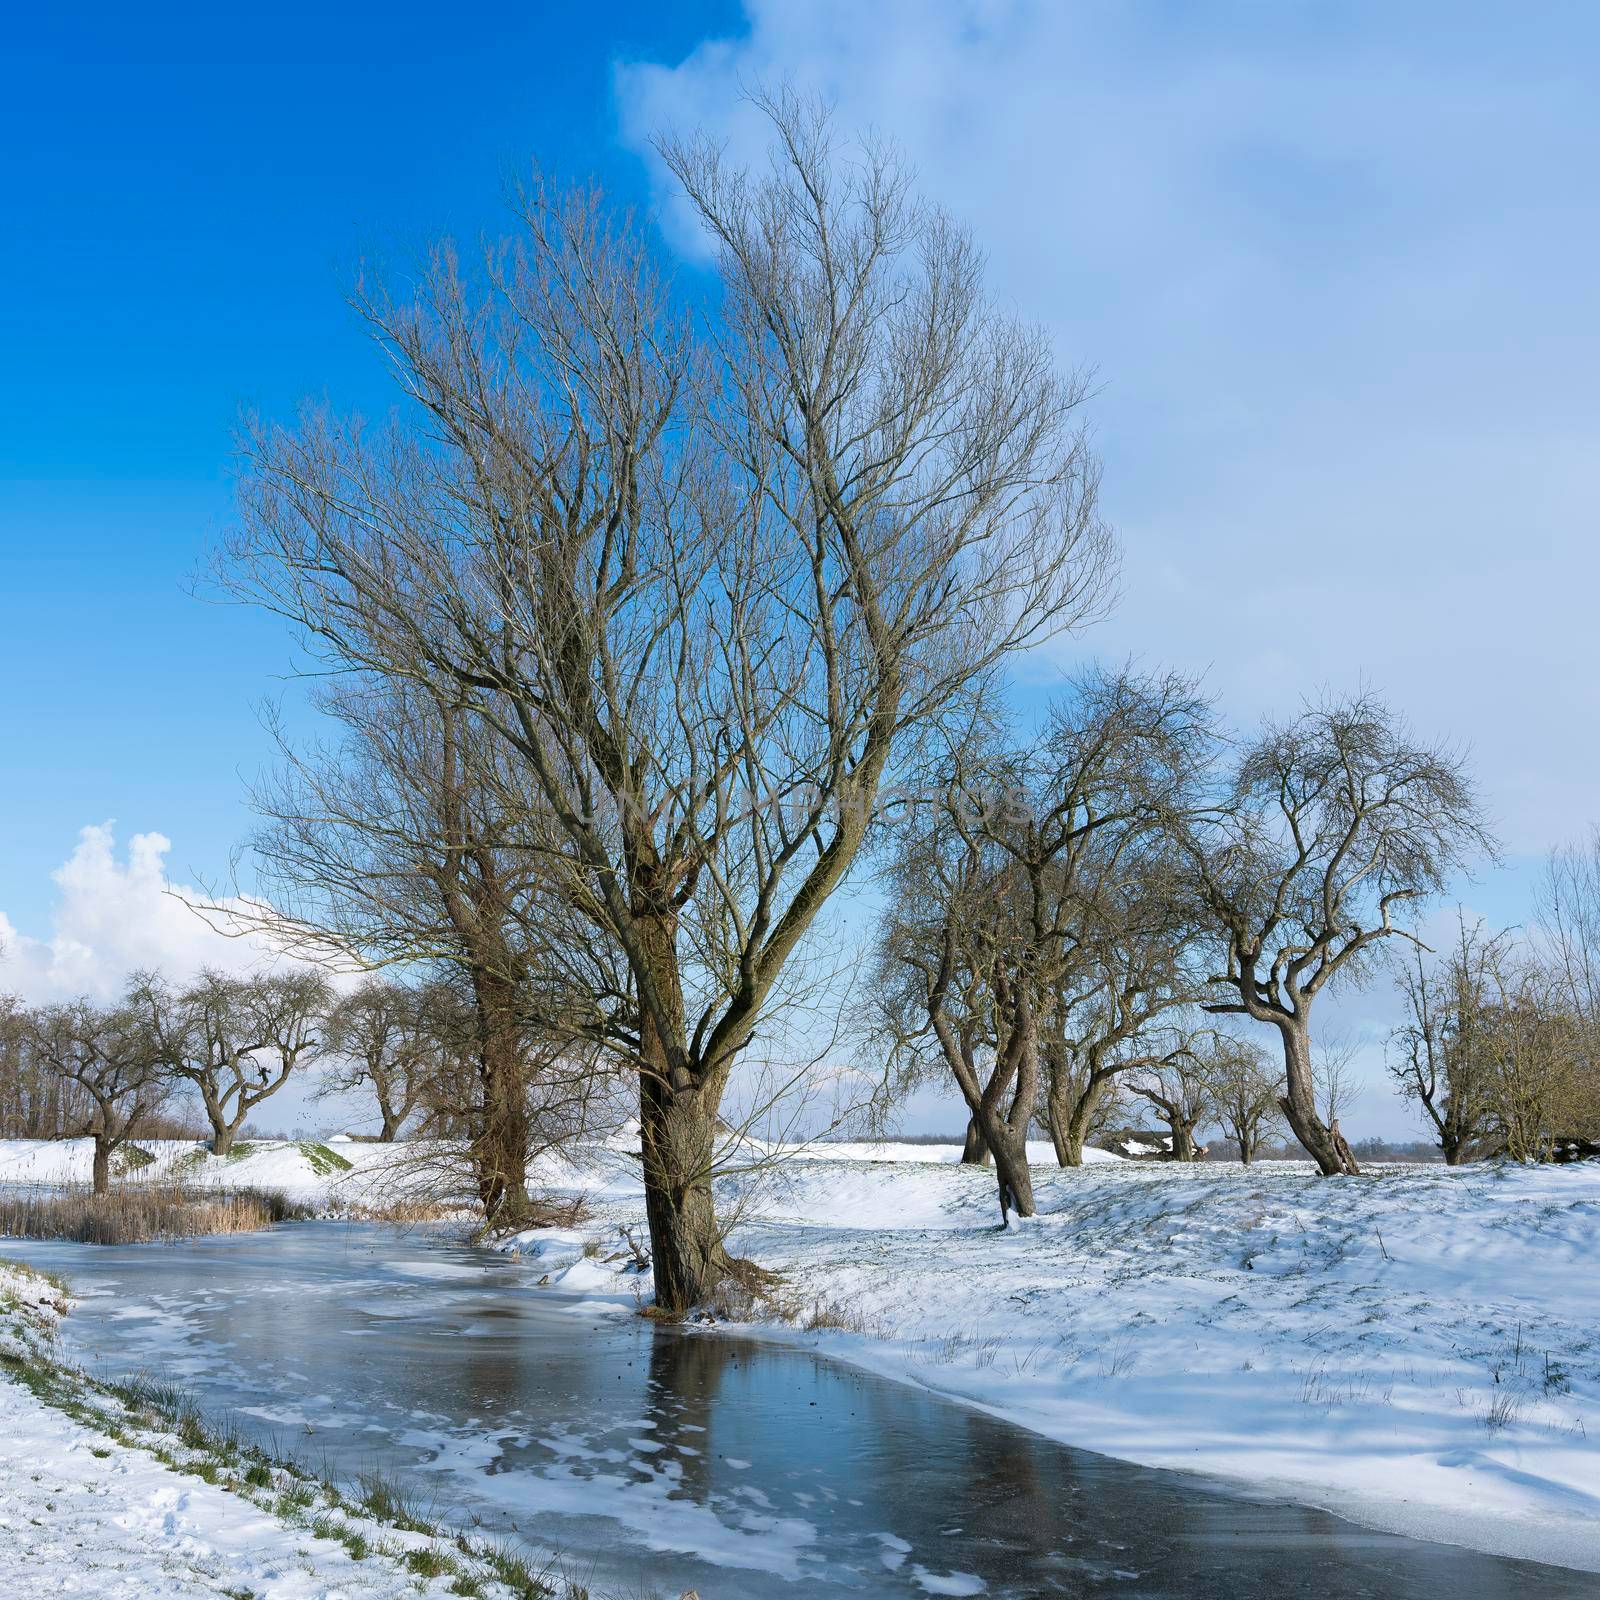 trees in winter landscape with snow and frozen pond in the netherlands by ahavelaar